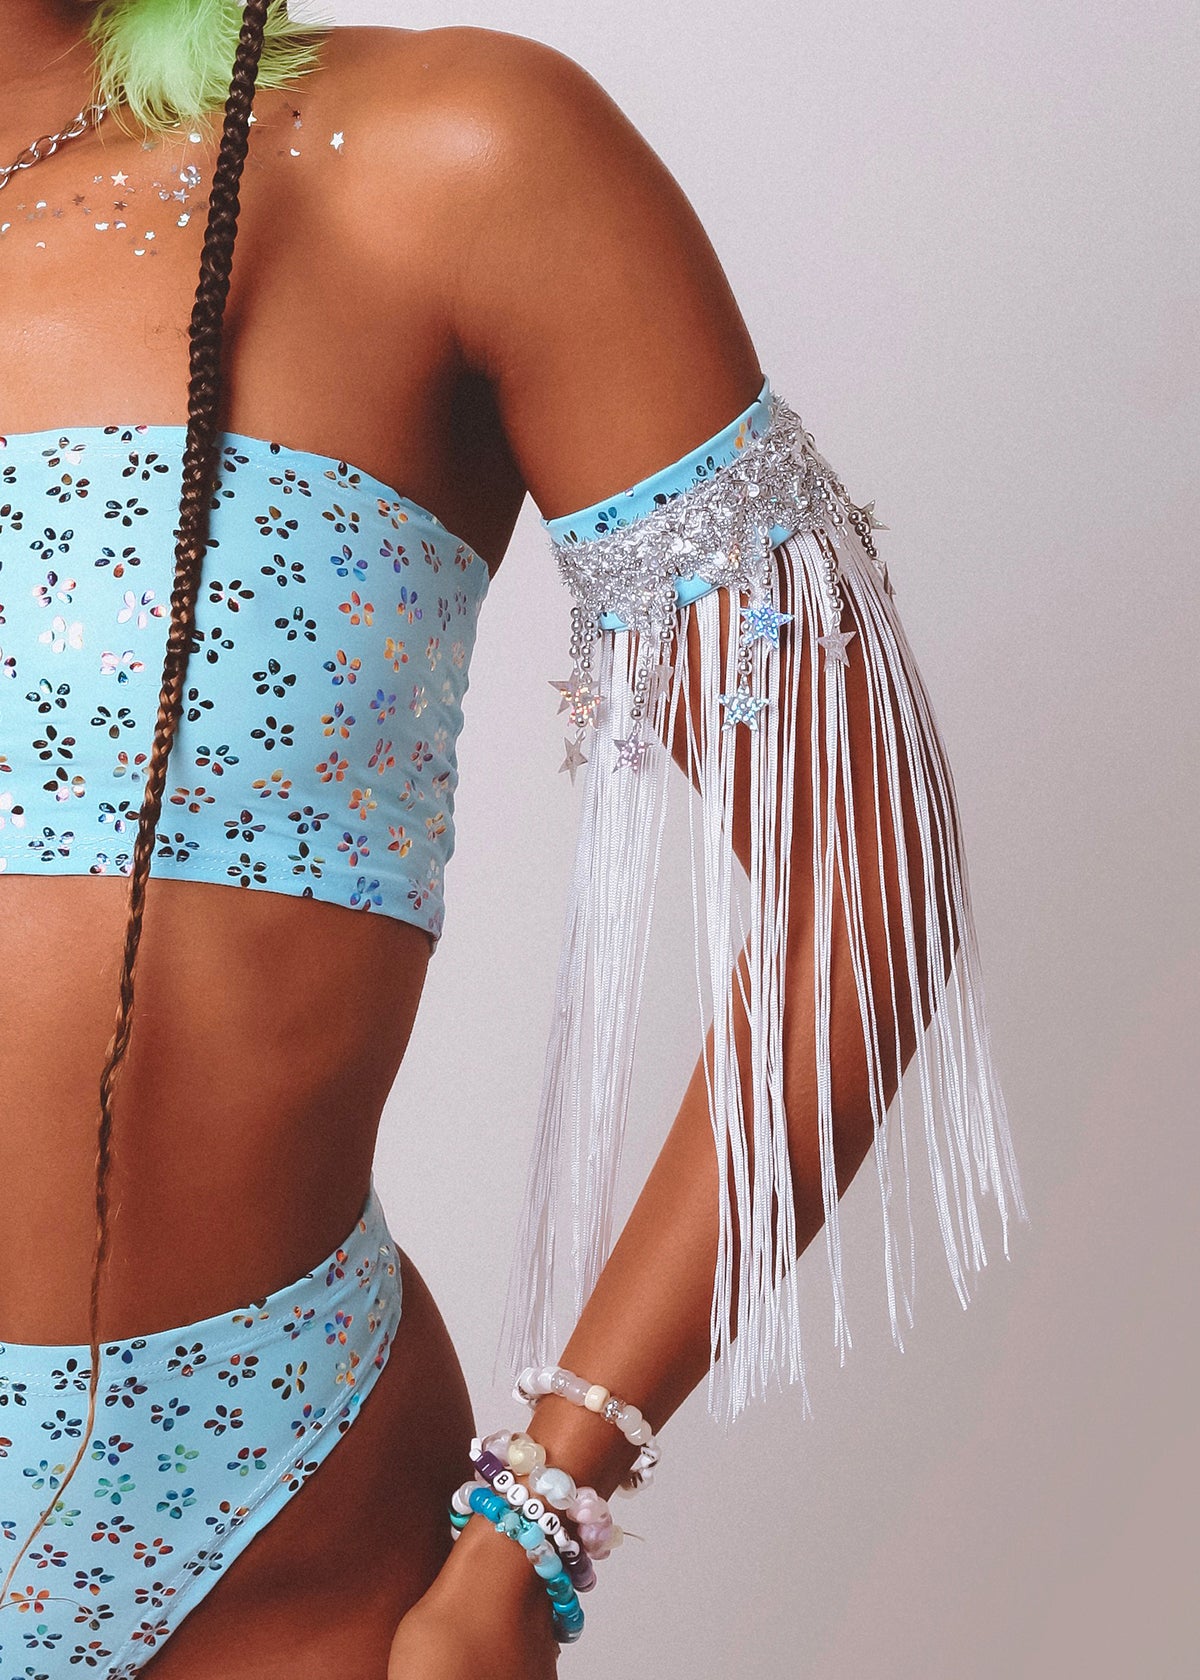 Baby Blue Gypsy Star and White Long Fringed Arm Cuffs